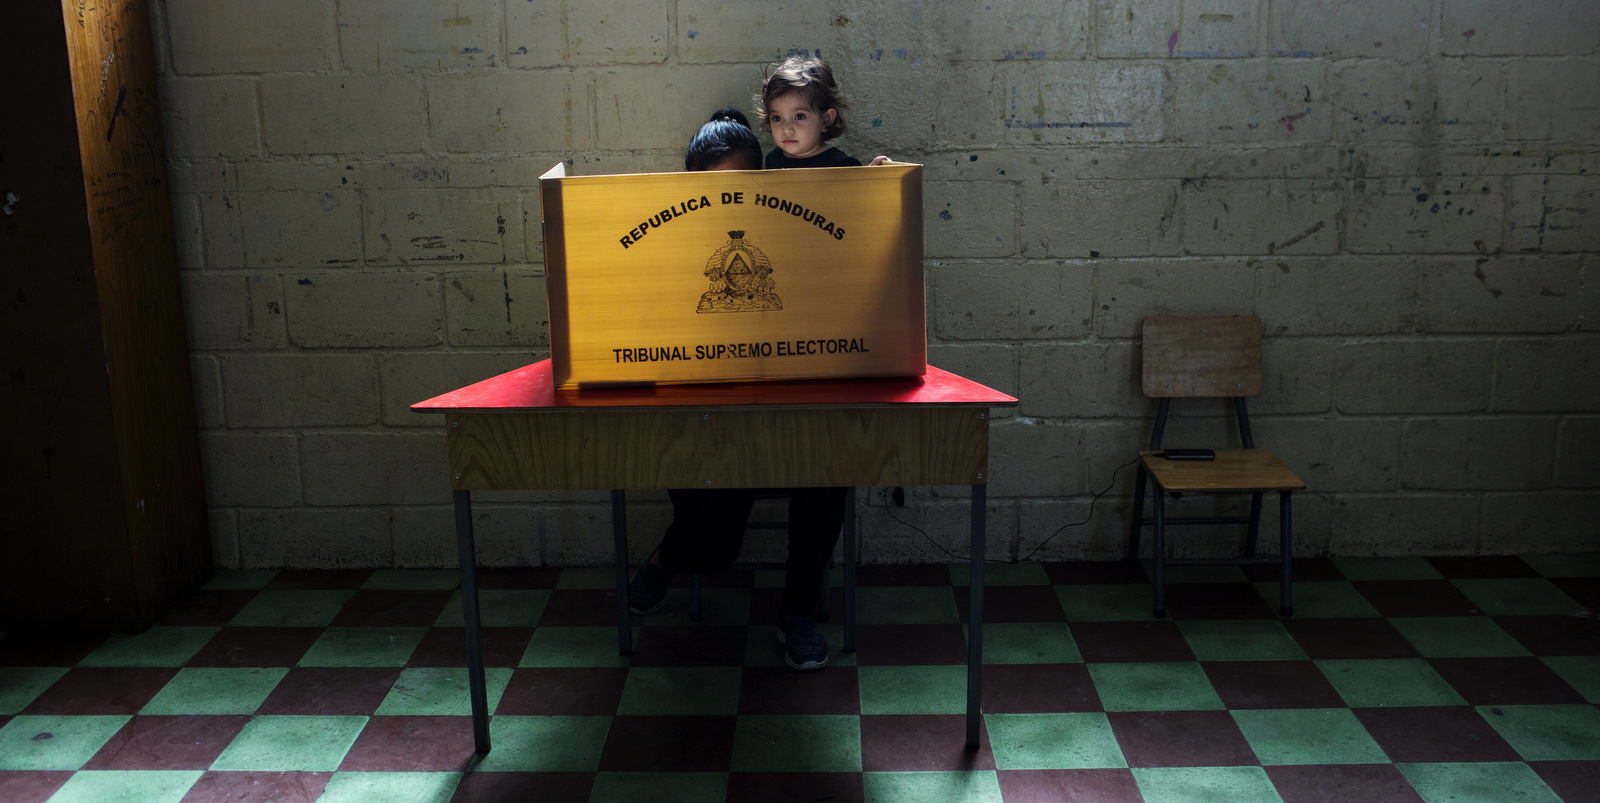 Lina Colindres, accompanies her mother Nely while casting her vote during the general elections in Tegucigalpa, Honduras, Nov. 26, 2017. (AP/Rodrigo Abd)